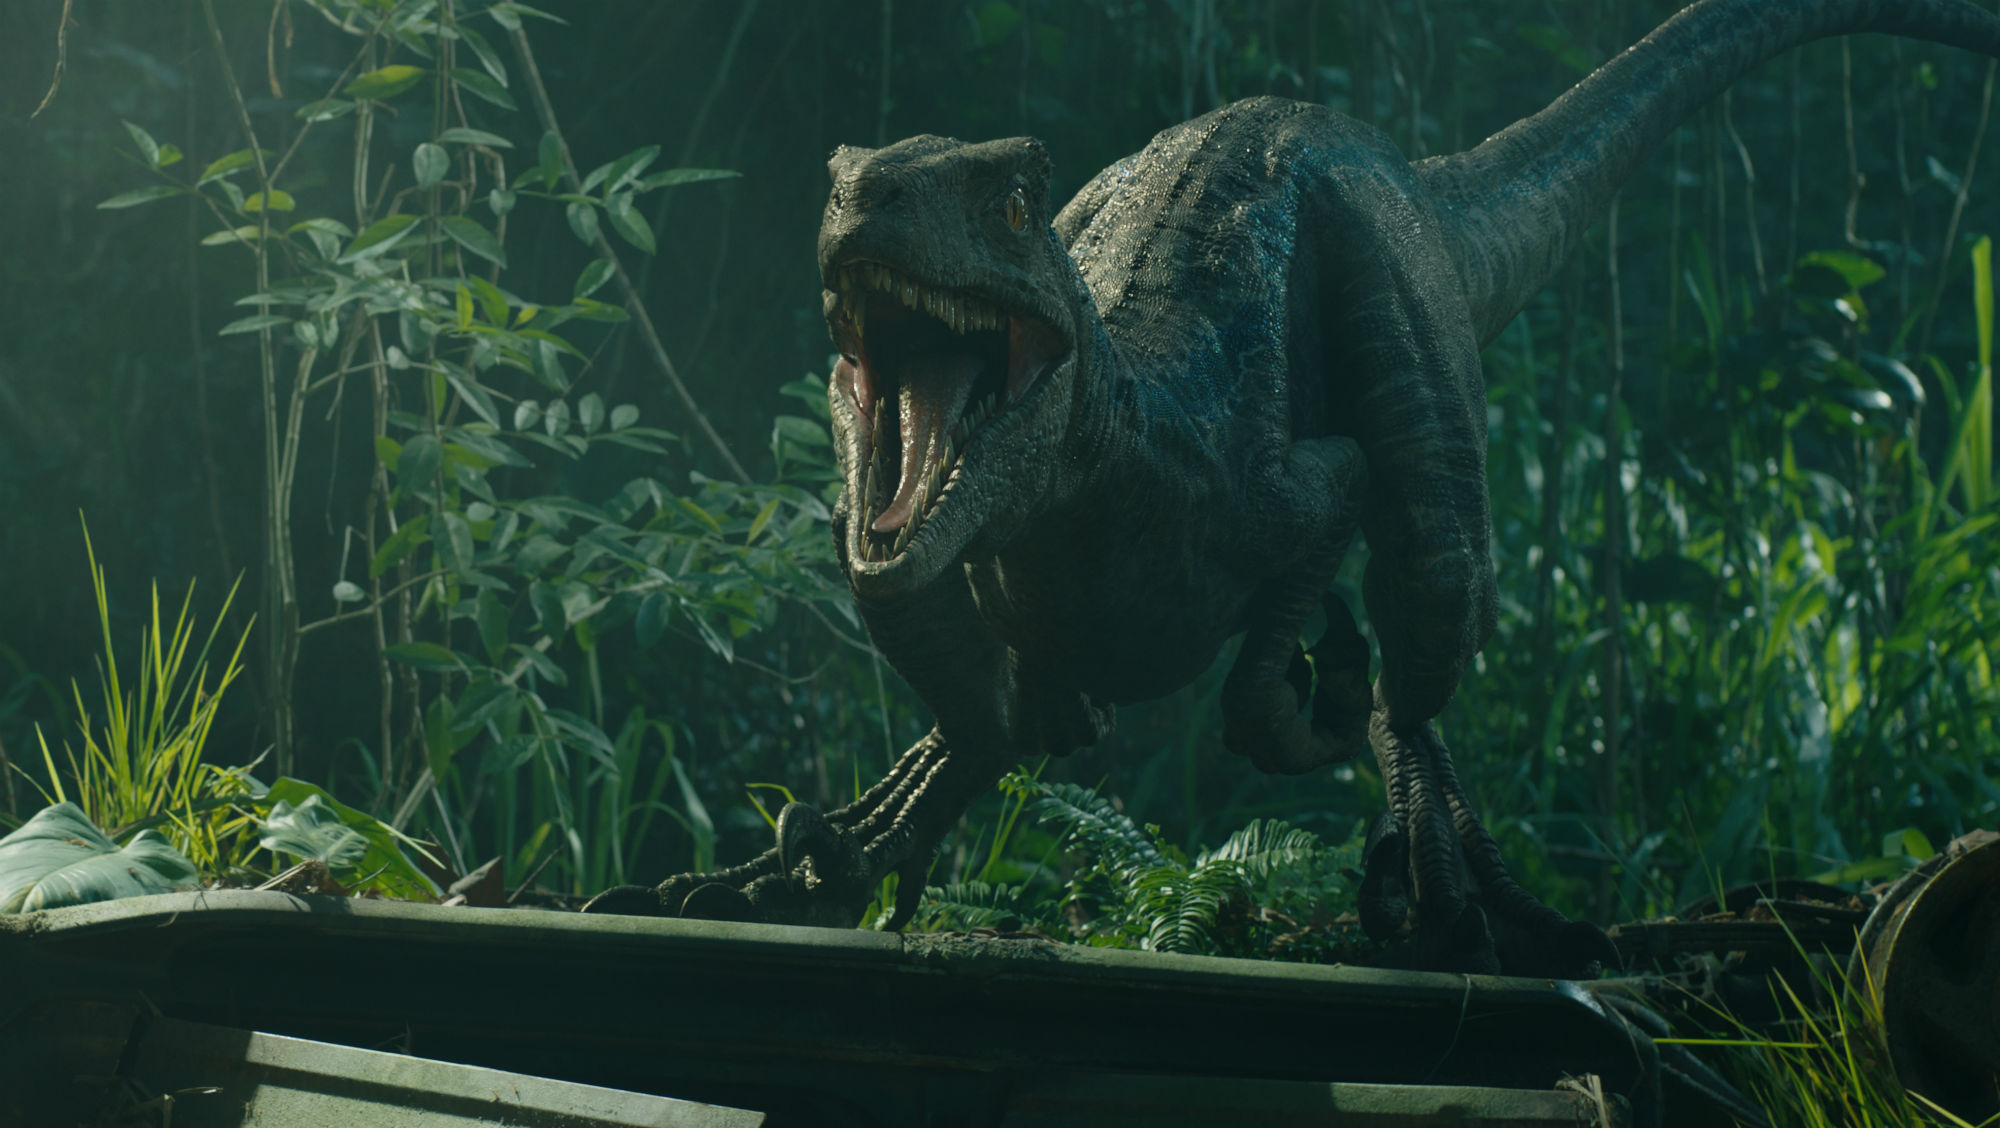 The Makers Of Jurassic World: Fallen Kingdom Solve Some Of The Film’s Big Mysteries